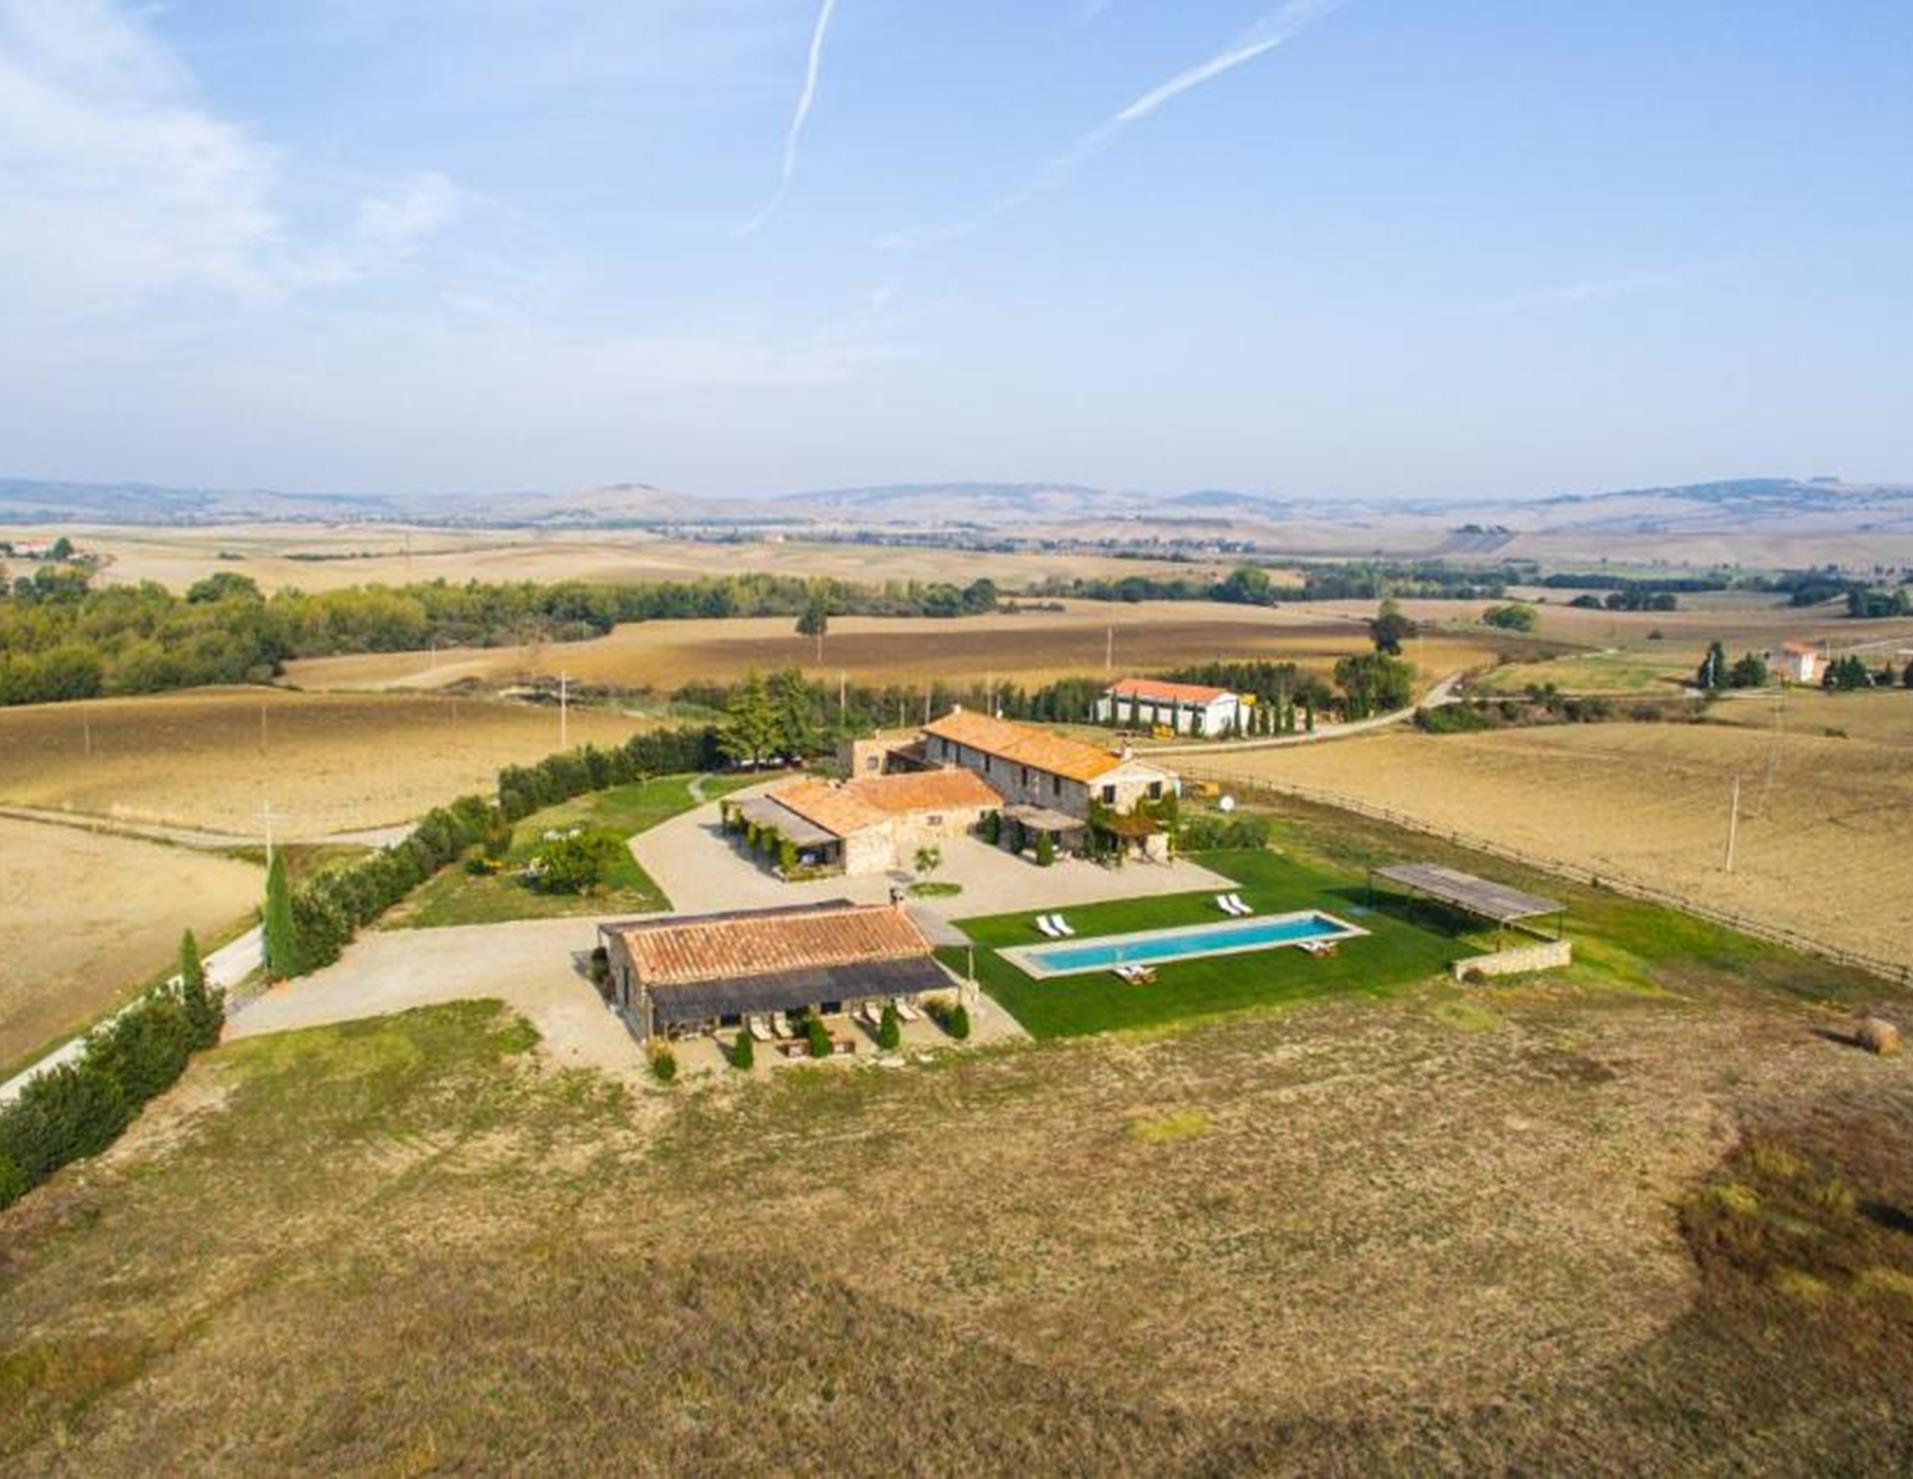 Locanda In Tuscany - Aerial View